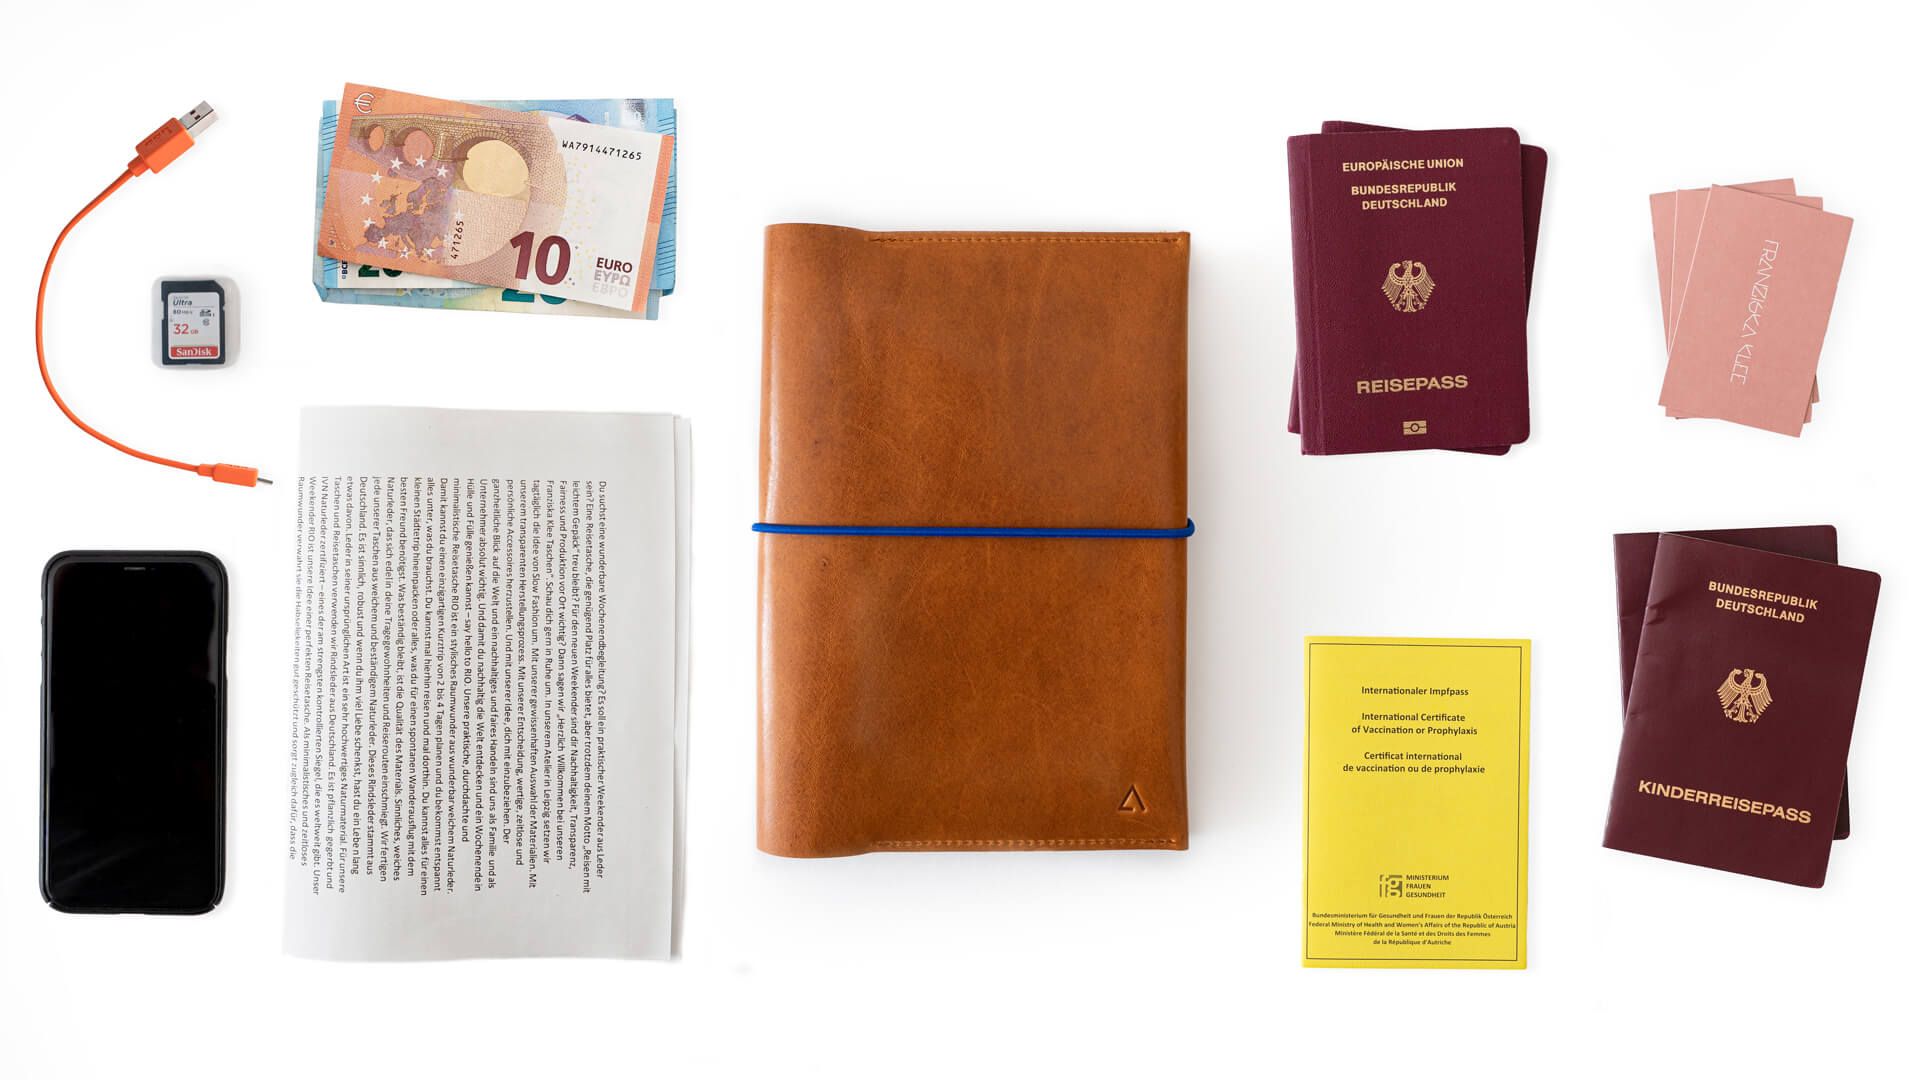 Our document case has space for up to four passports, vaccination cards, EC and business cards as well as A5 size documents, a smartphone, charging cable, SIM and SD card and cash.